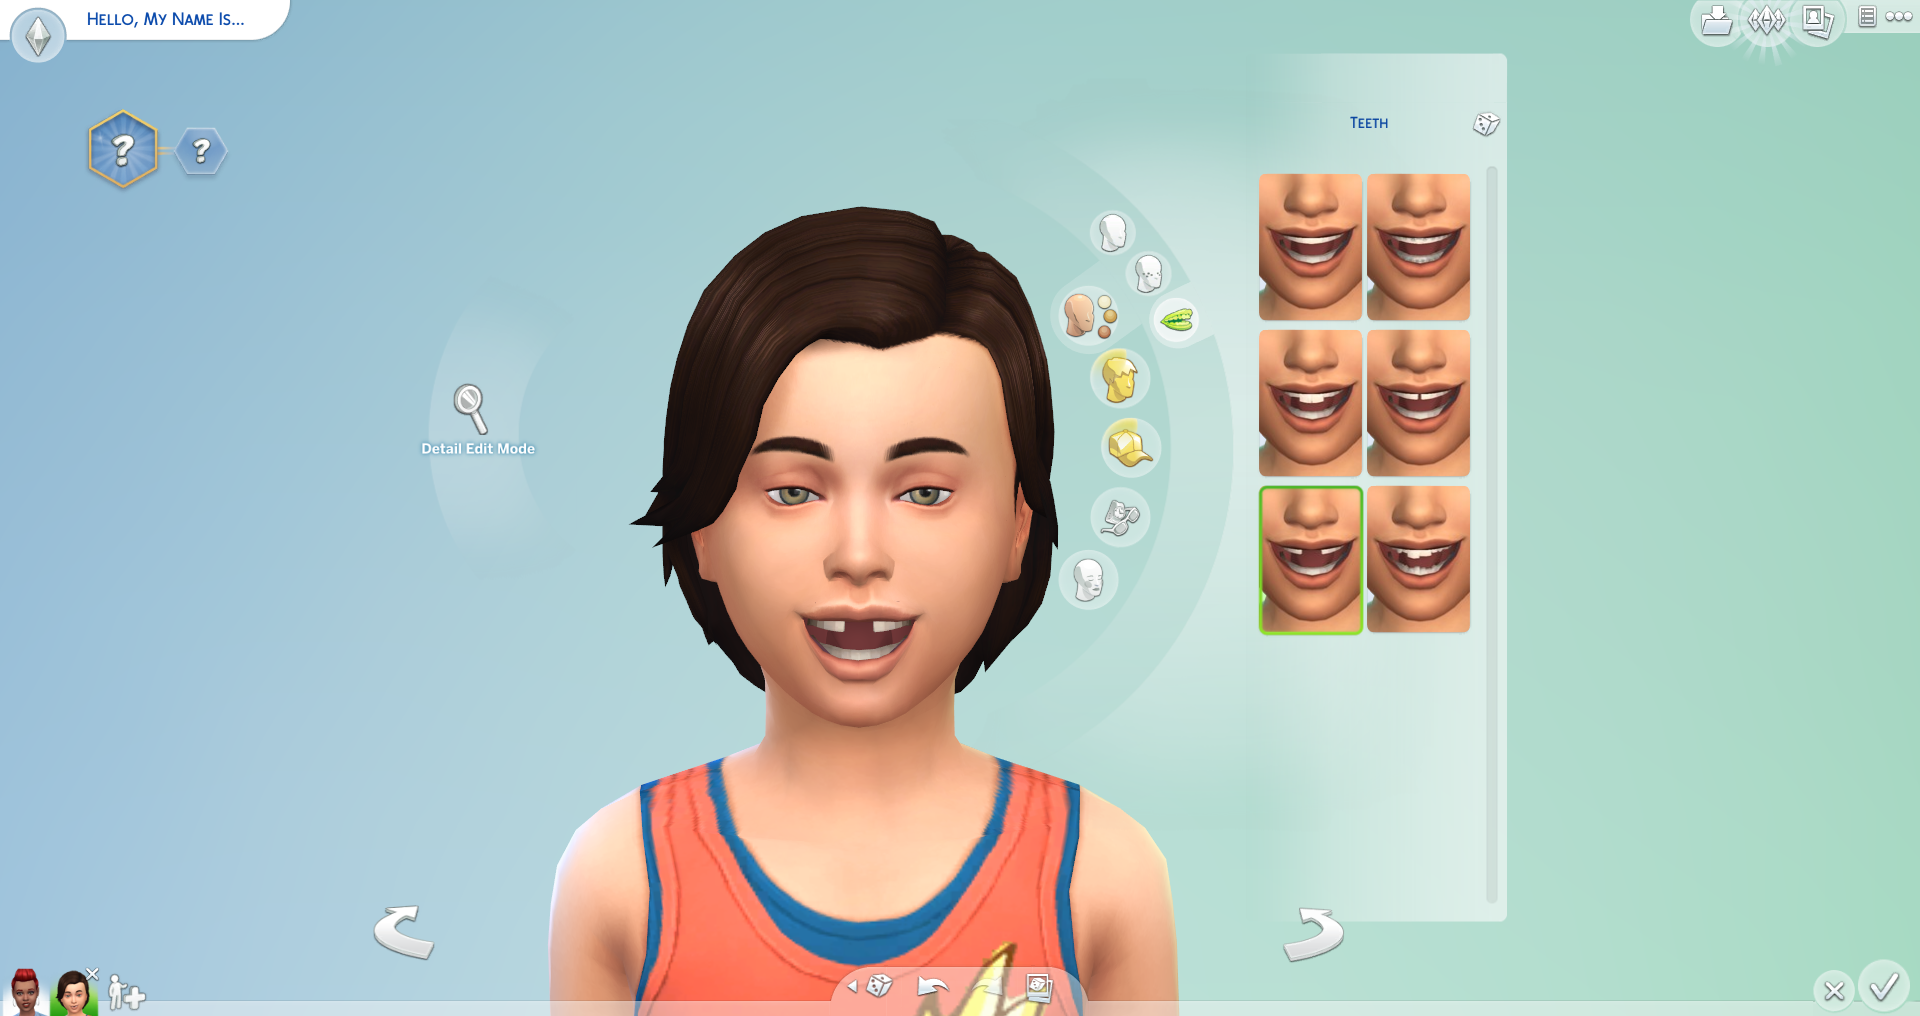 list of toddler traits on sims 4